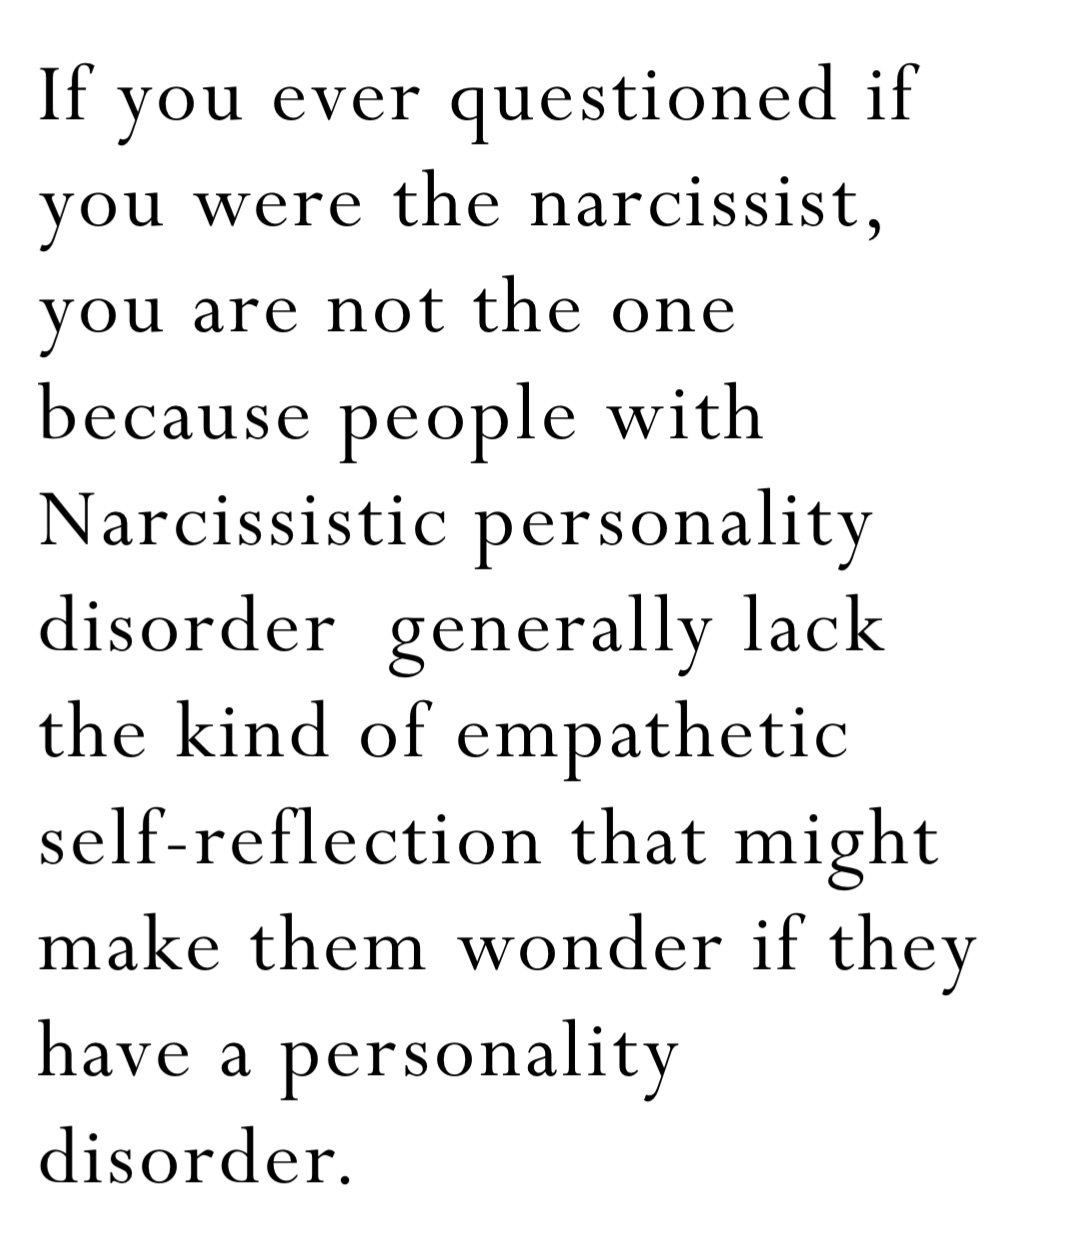 If you ever questioned if you were the narcissist, you are not the one because people with Narcissistic personality disorder  generally lack the kind of empathetic self-reflection that might make them wonder if they have a personality disorder.